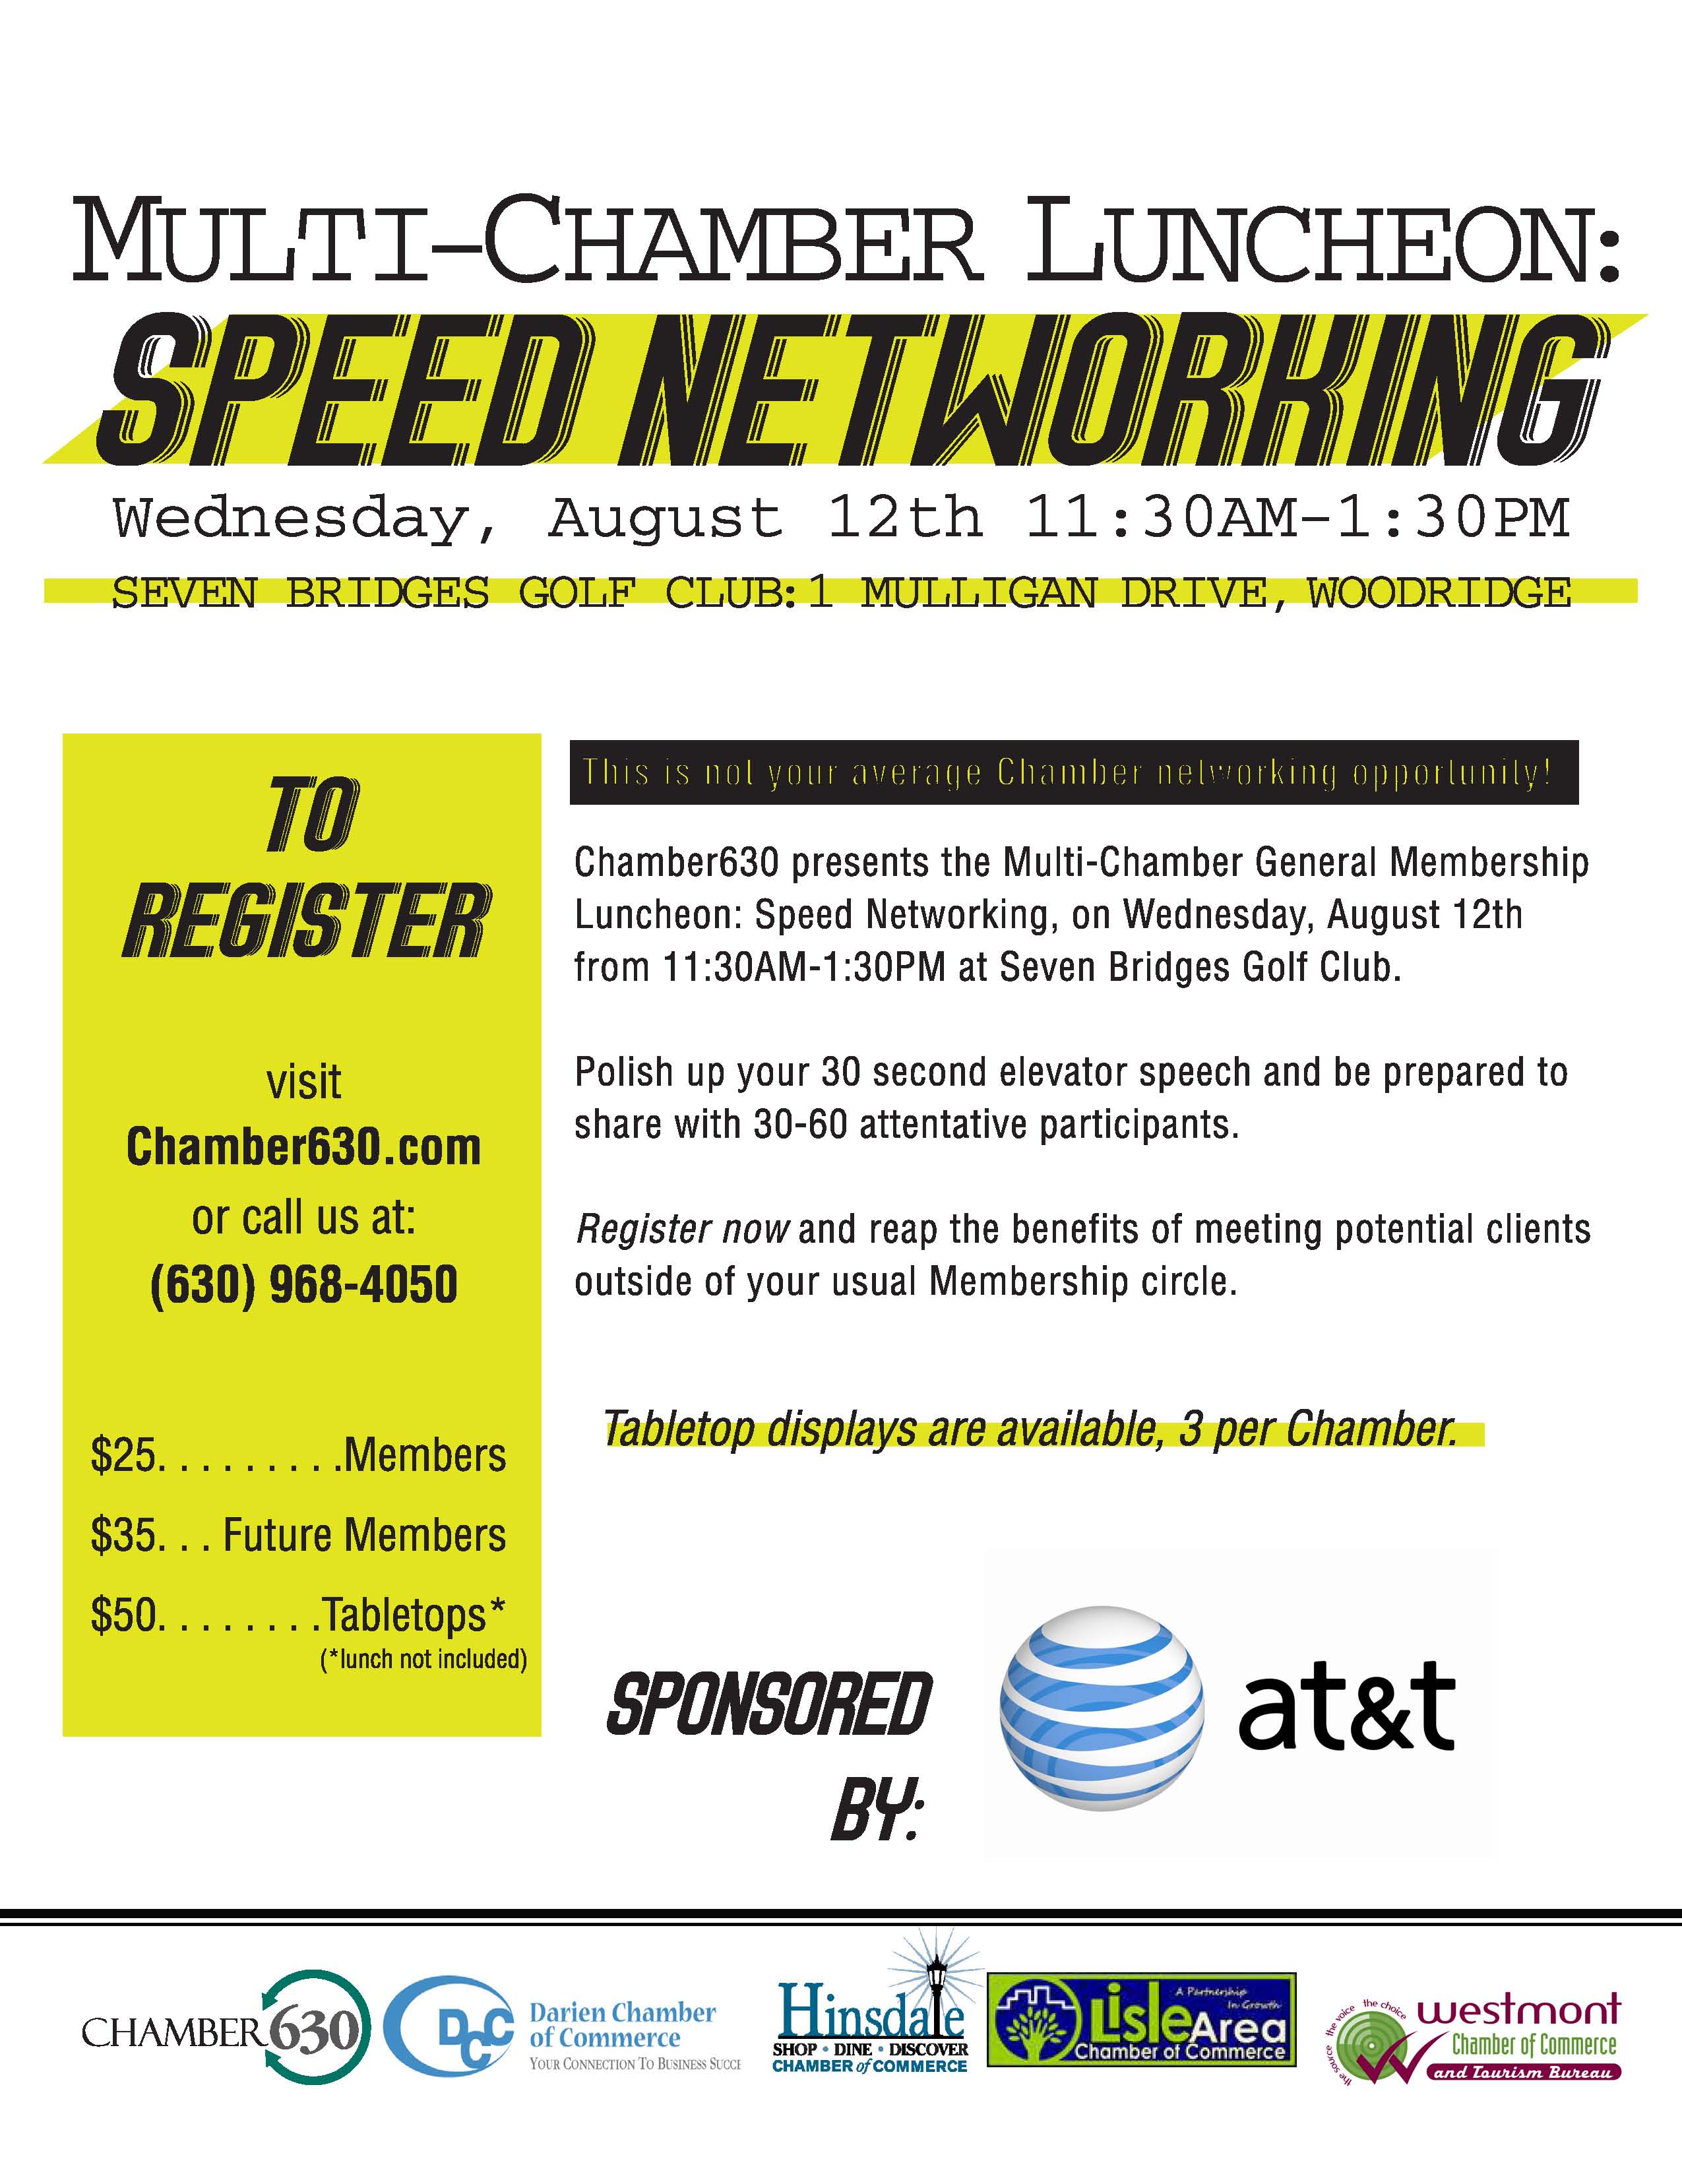 Speed-Networking-Flyer-Outlines